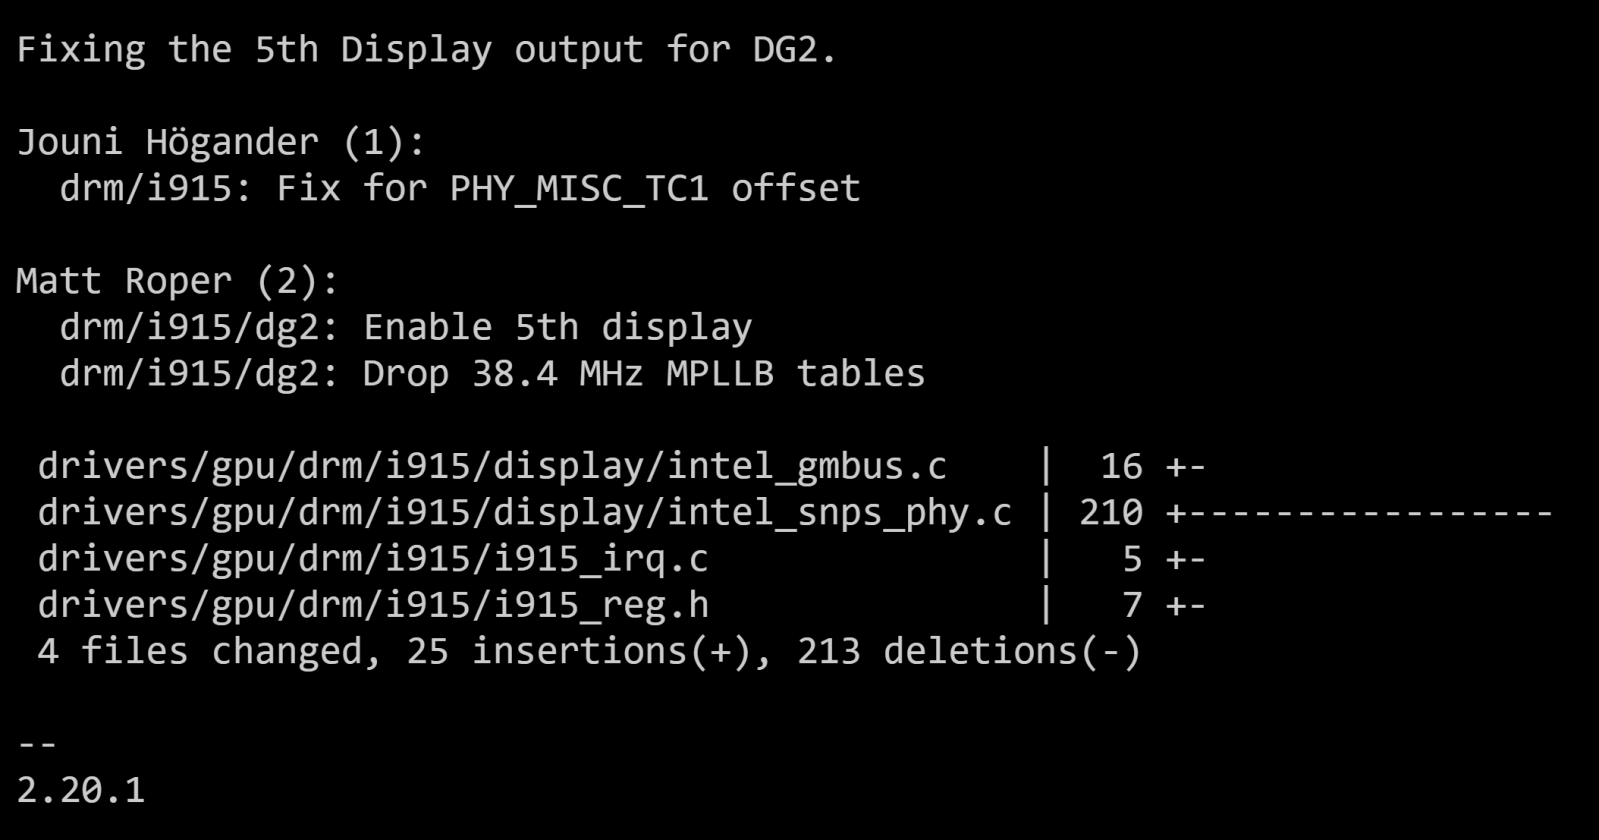 Intel-DG2-5th-Display-Support.png